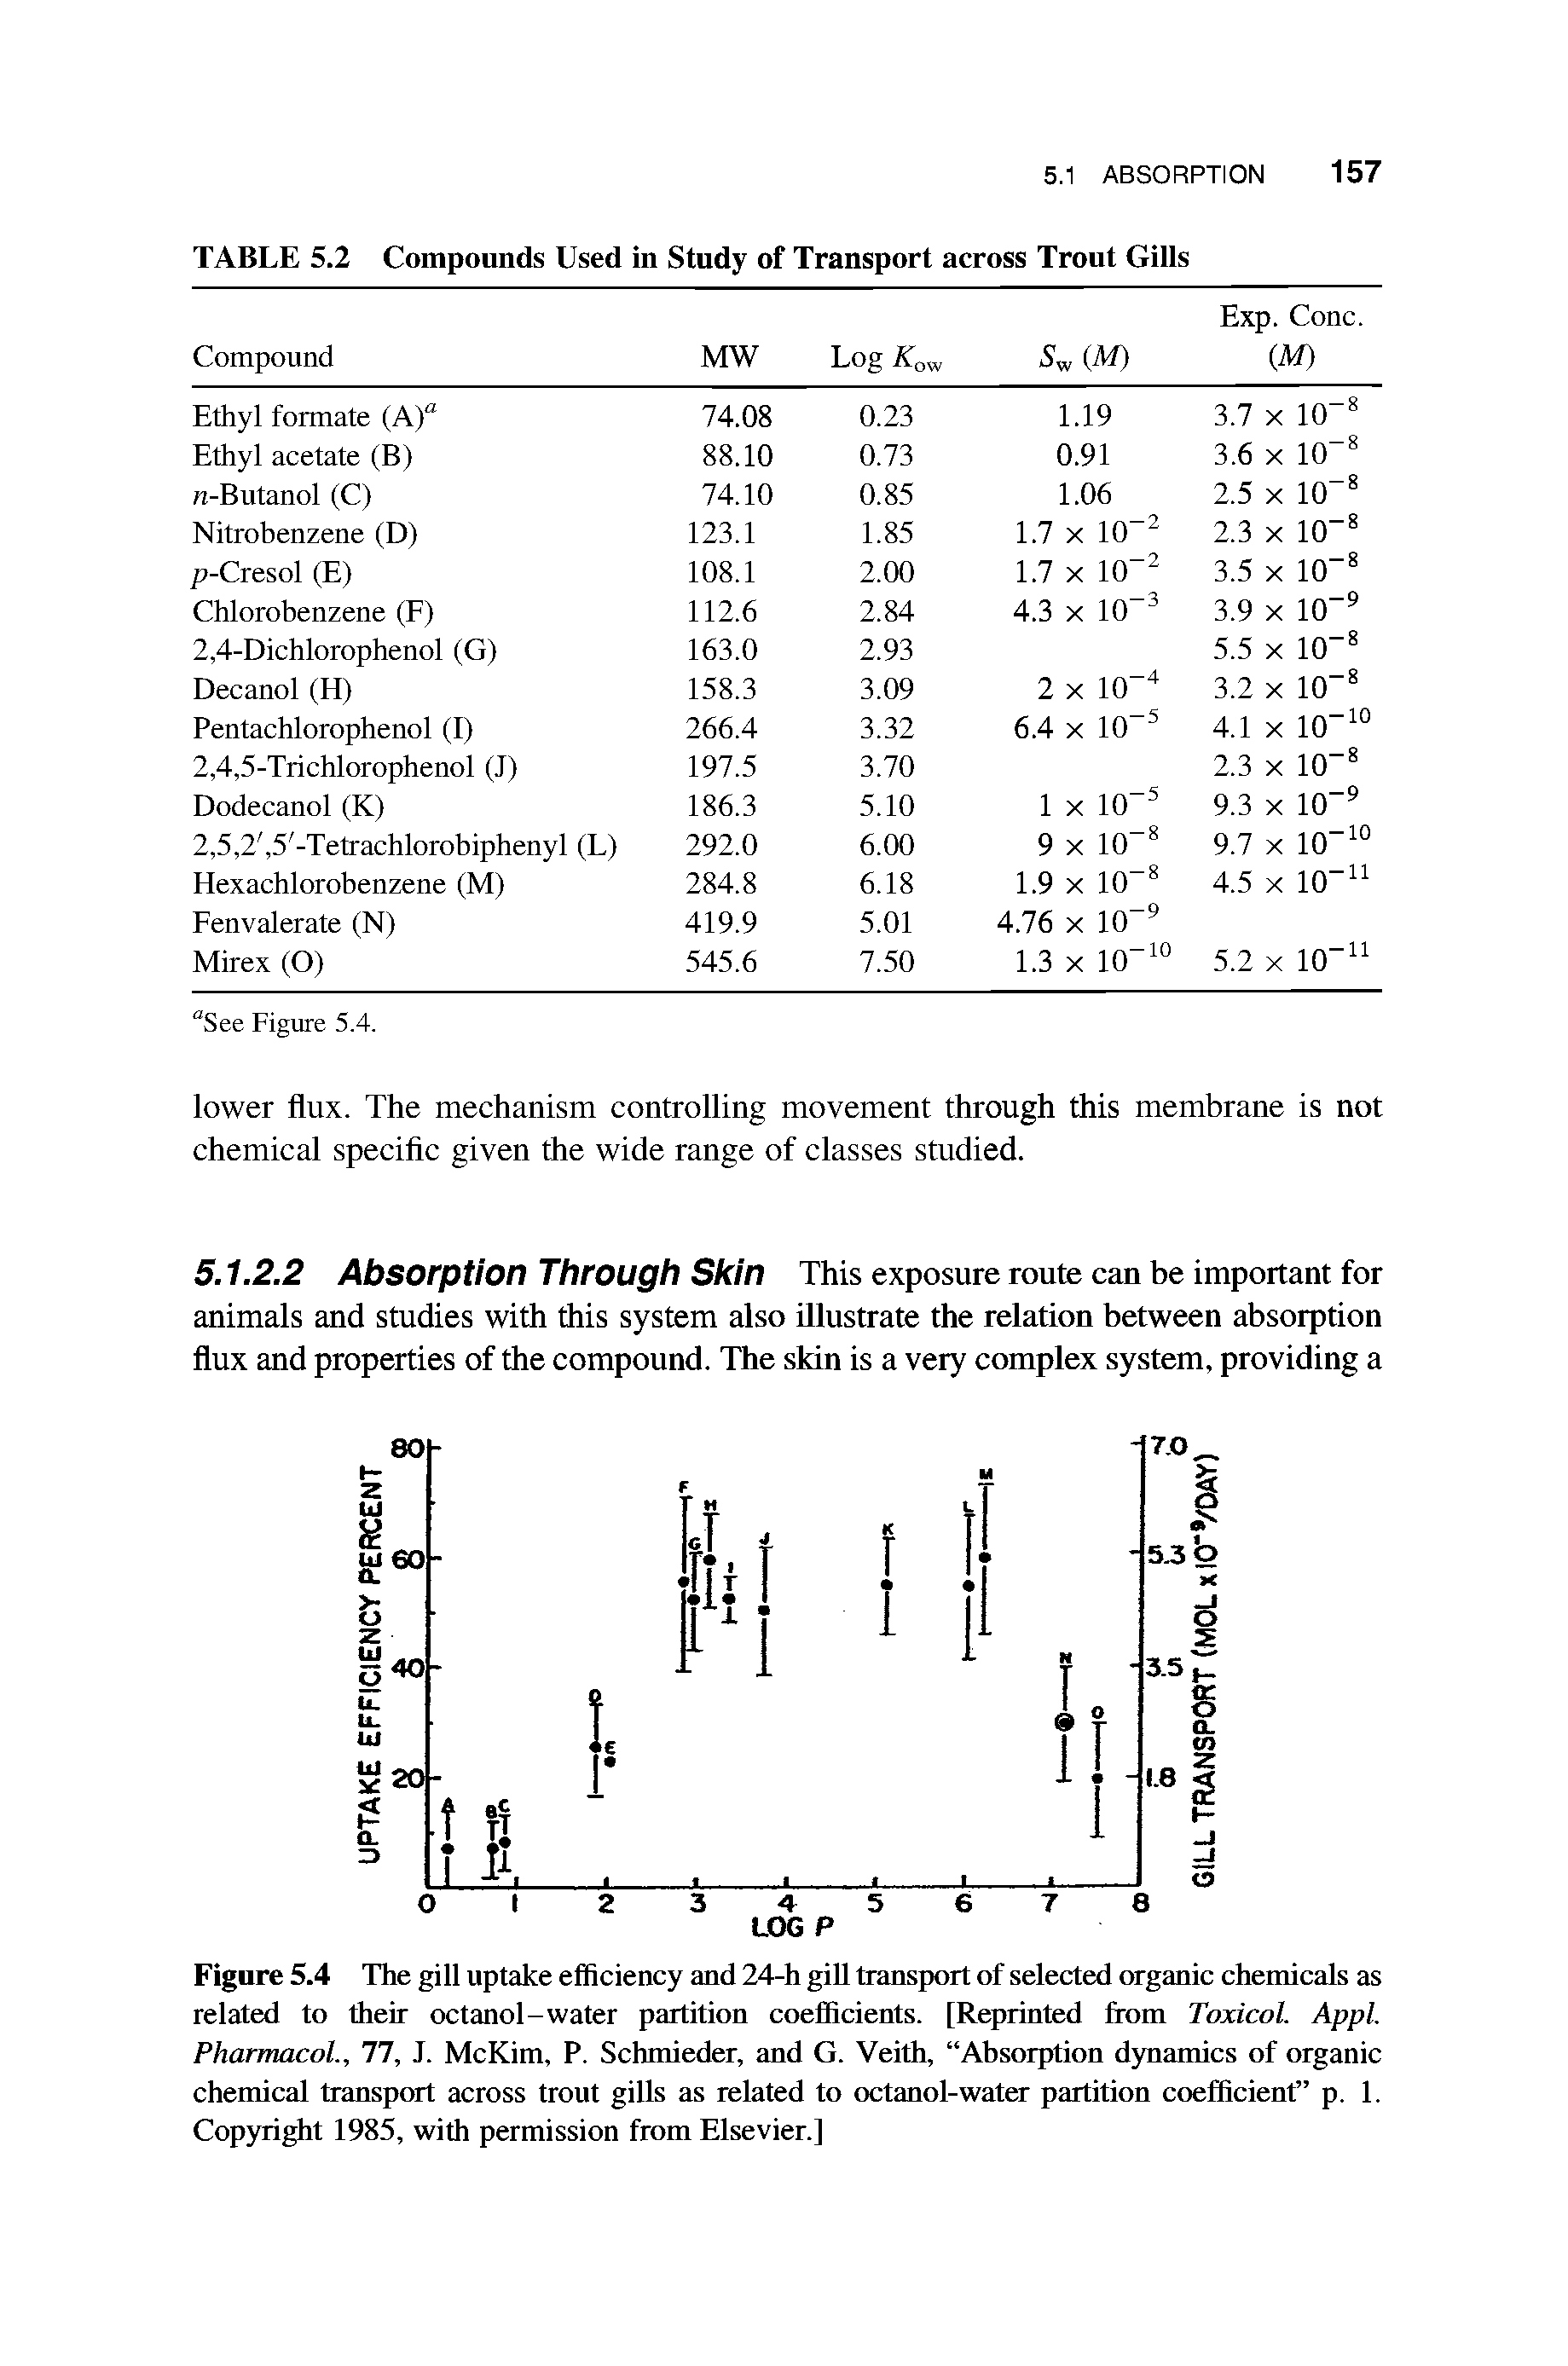 Figure 5.4 The gill uptake efficiency and 24-h giU transport of selected organic chemicals as related to their octanol-water partition coefficients. [Reprinted from Toxicol. Appl. Pharmacol., 77, J. McKim, P. Schmieder, and G. Veith, Absorption d3mamics of organic chemical transport across trout gills as related to octanol-water partition coefficient p. 1. Copyright 1985, with permission from Elsevier.]...